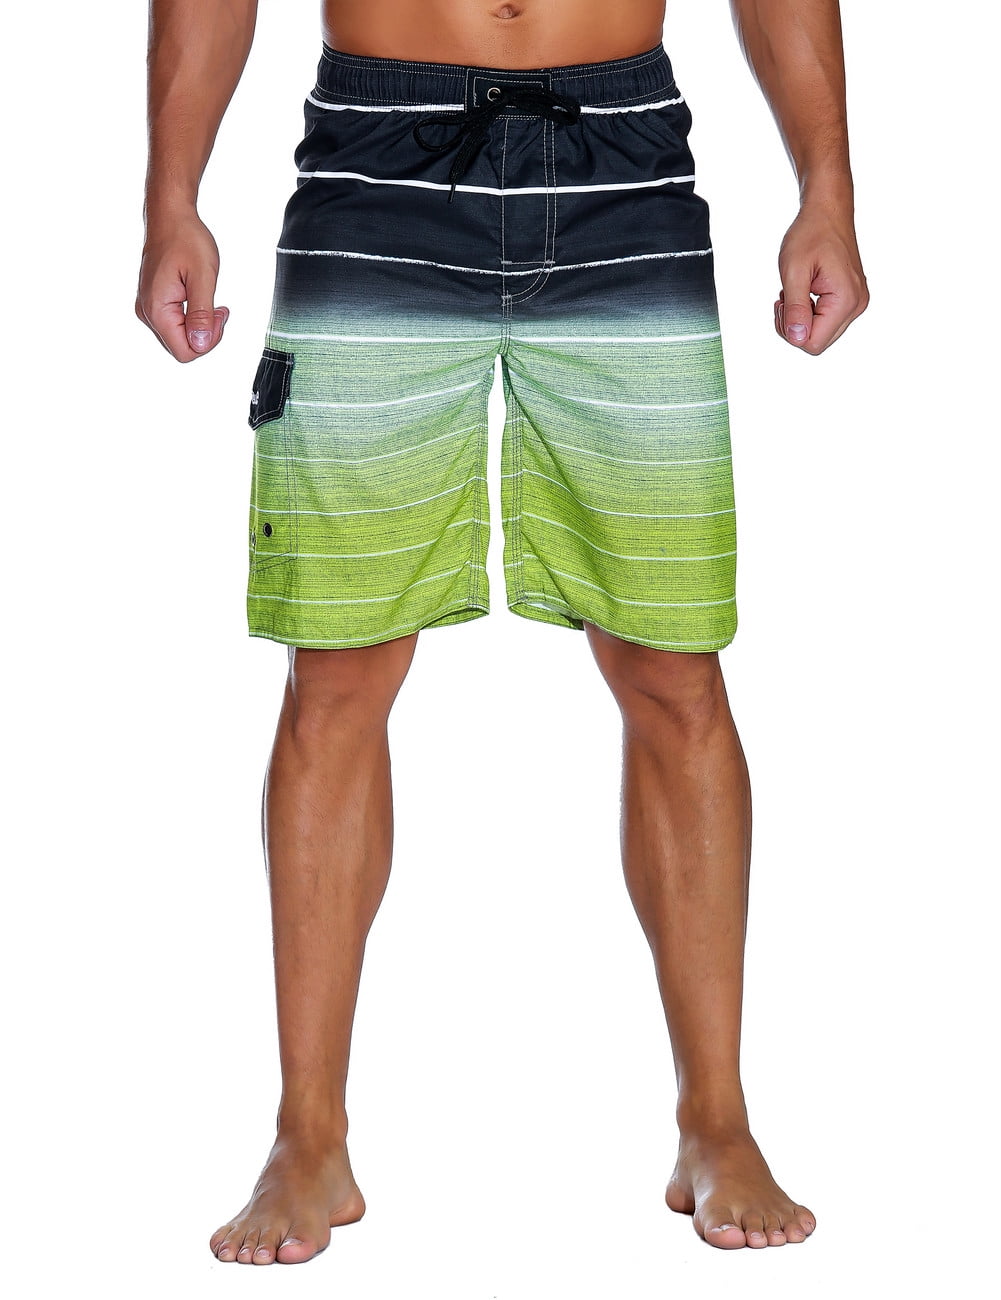 Unitop Women's Summer Hot Board Shorts with Lining Mesh